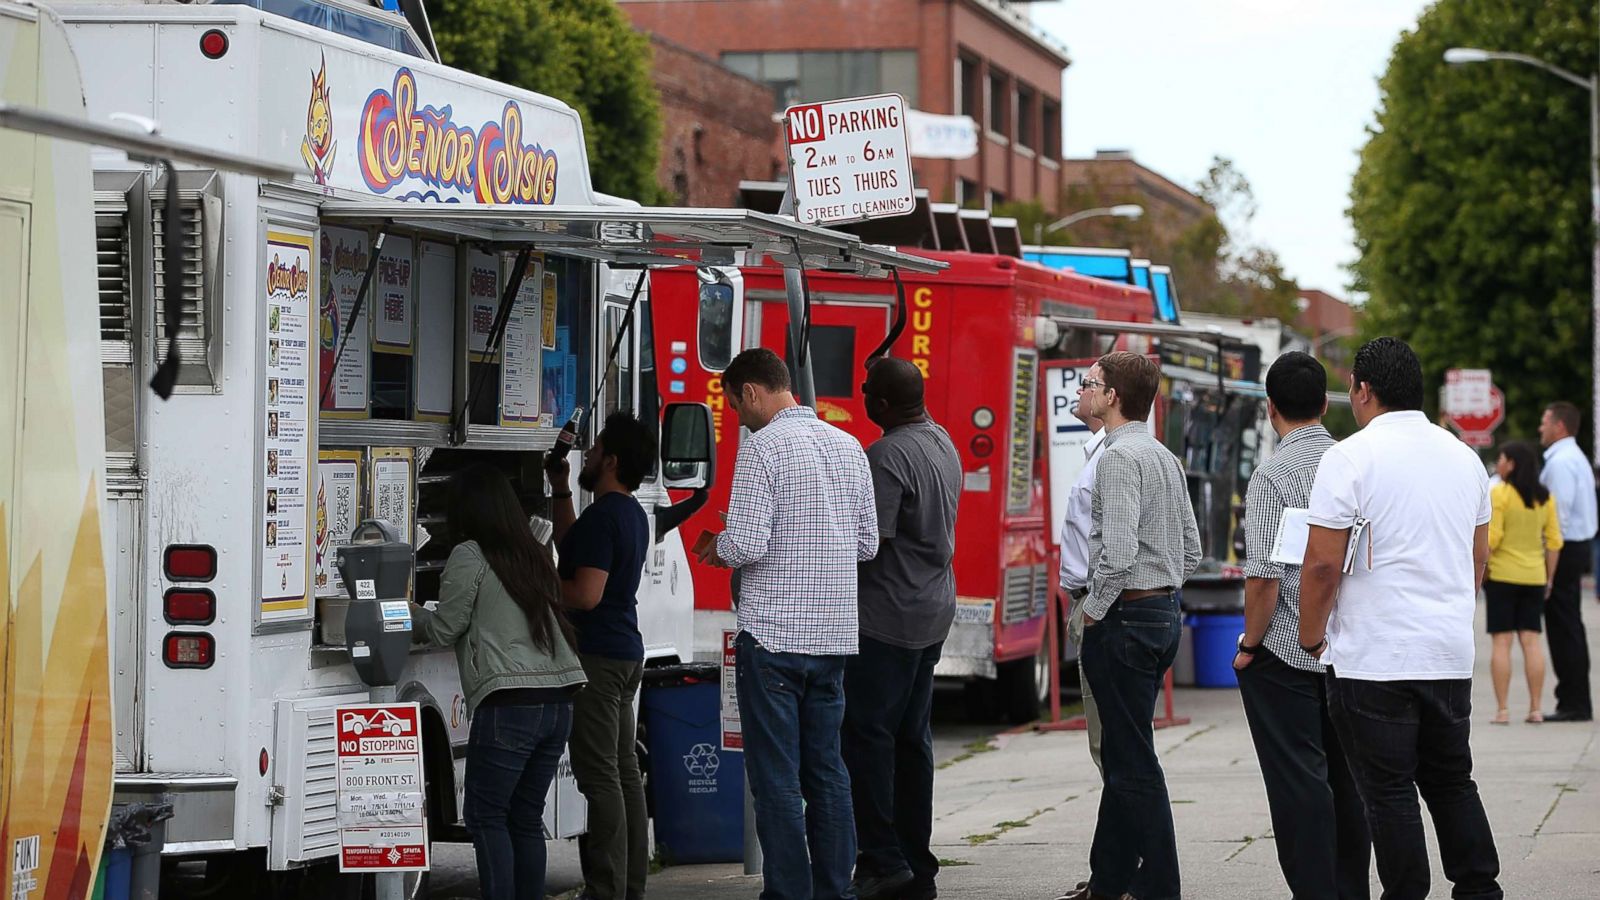 PHOTO: Customers line up to order food from food trucks on July 7, 2014 in San Francisco.